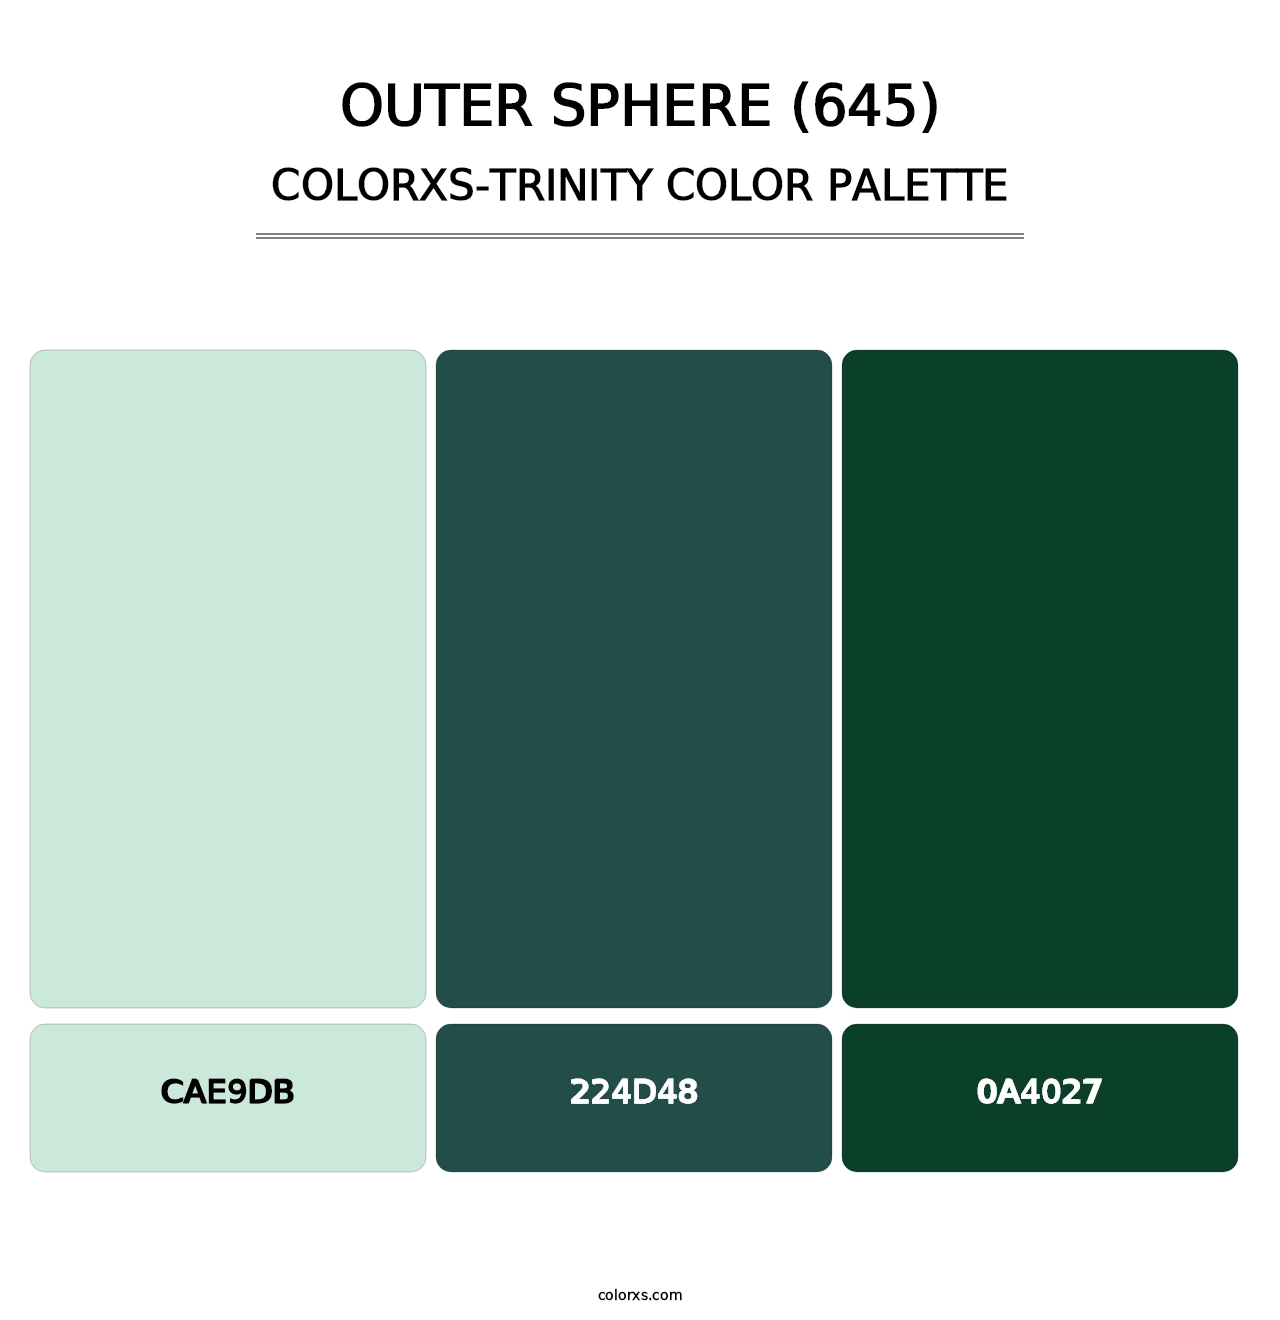 Outer Sphere (645) - Colorxs Trinity Palette